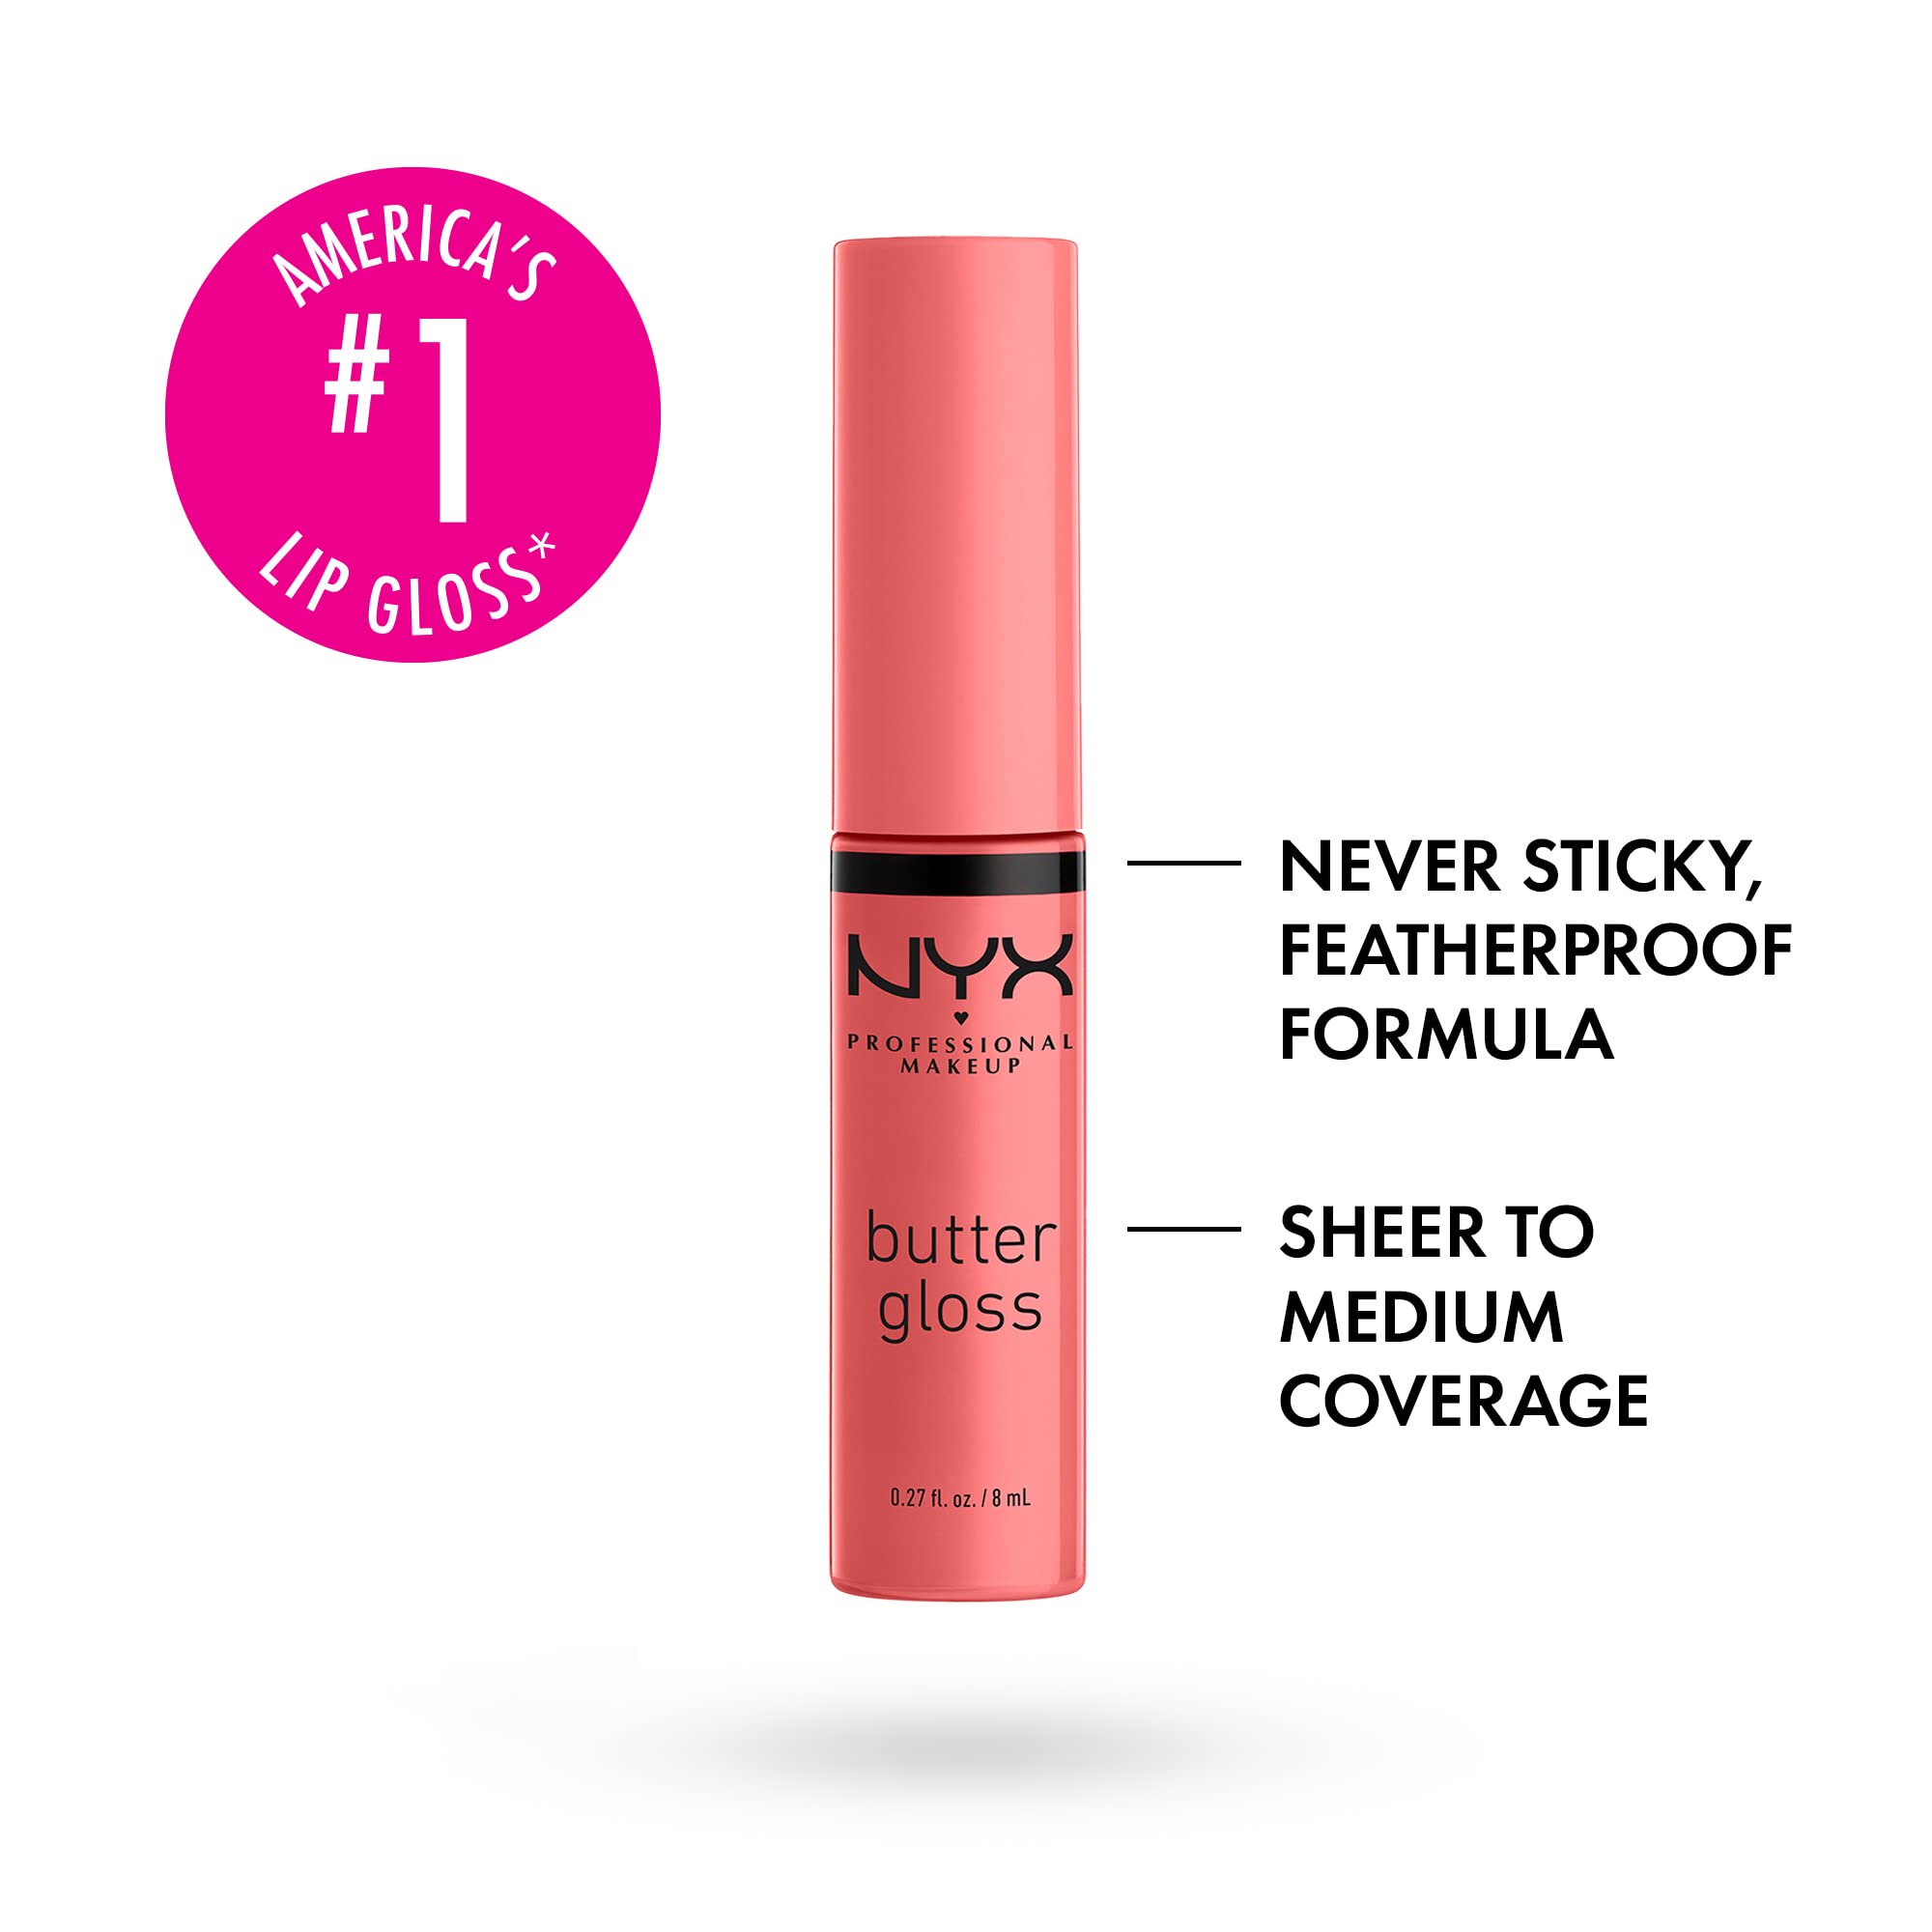 NYX PROFESSIONAL MAKEUP Butter Gloss, Non-Sticky Lip Gloss - Creme Brulee (Natural)